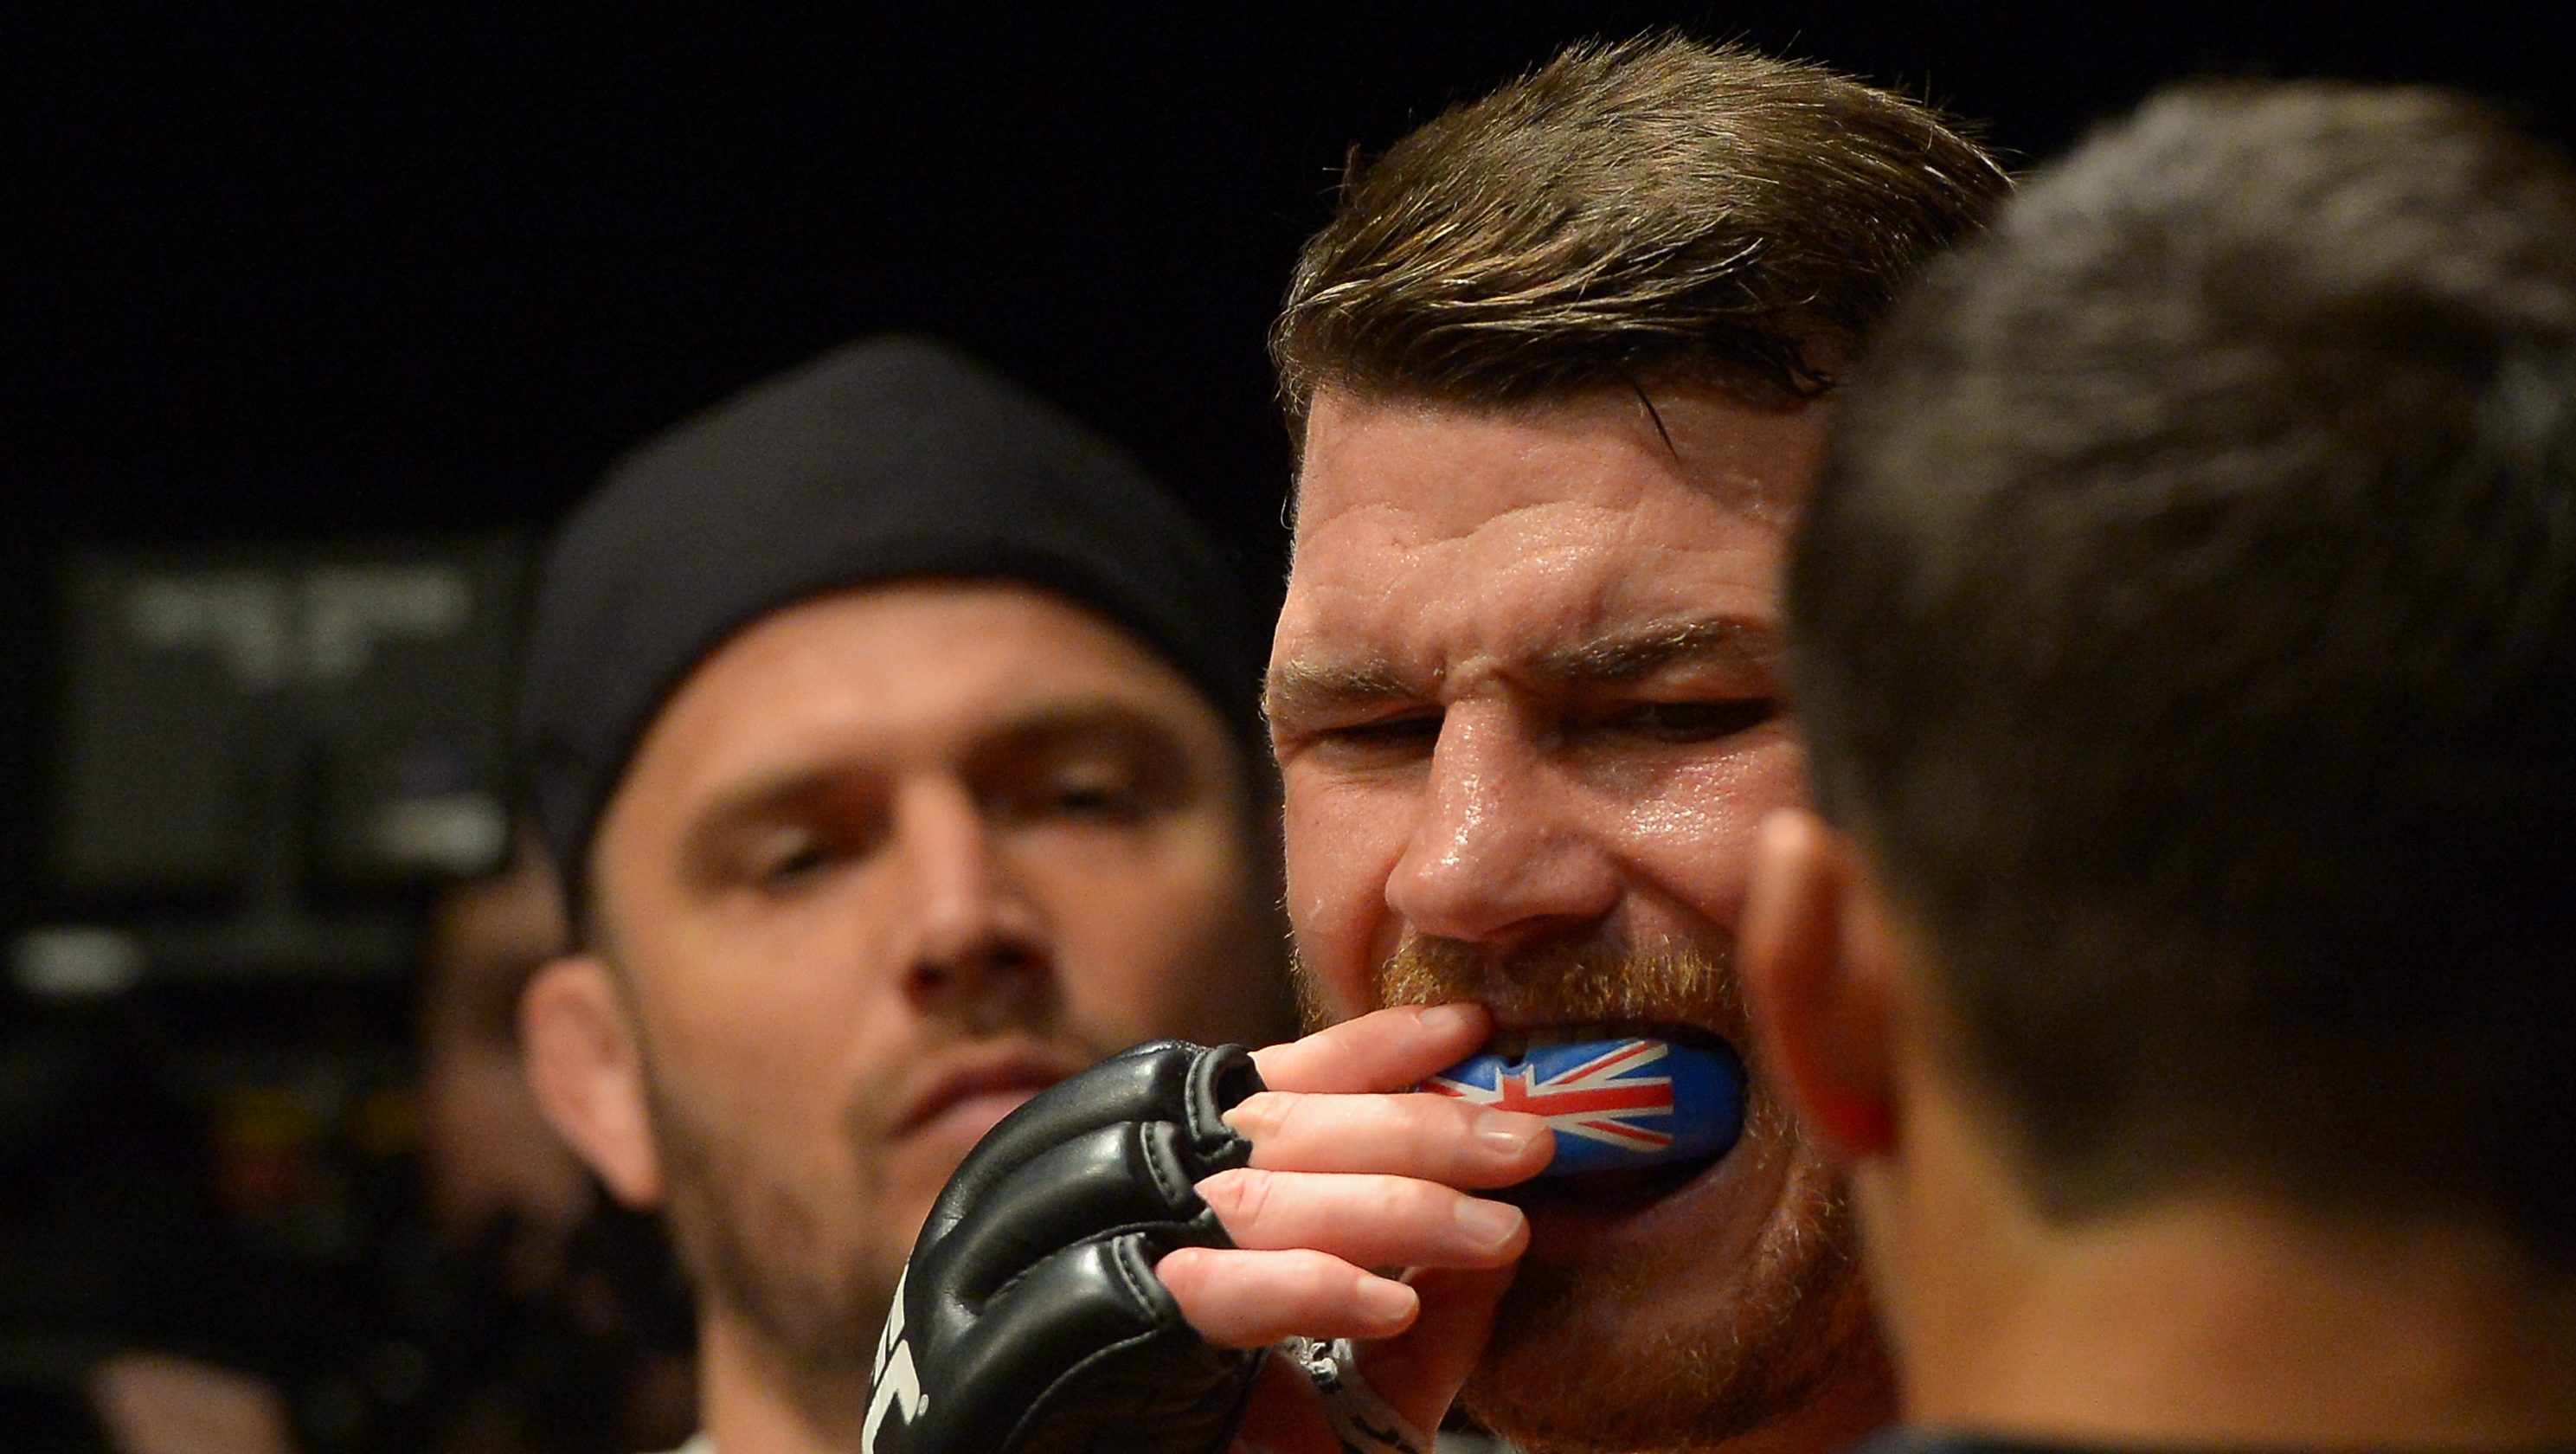 Ex-UFC Champ Michael Bisping Gets Huge Reaction for ‘Freaking
Jacked’ Photo